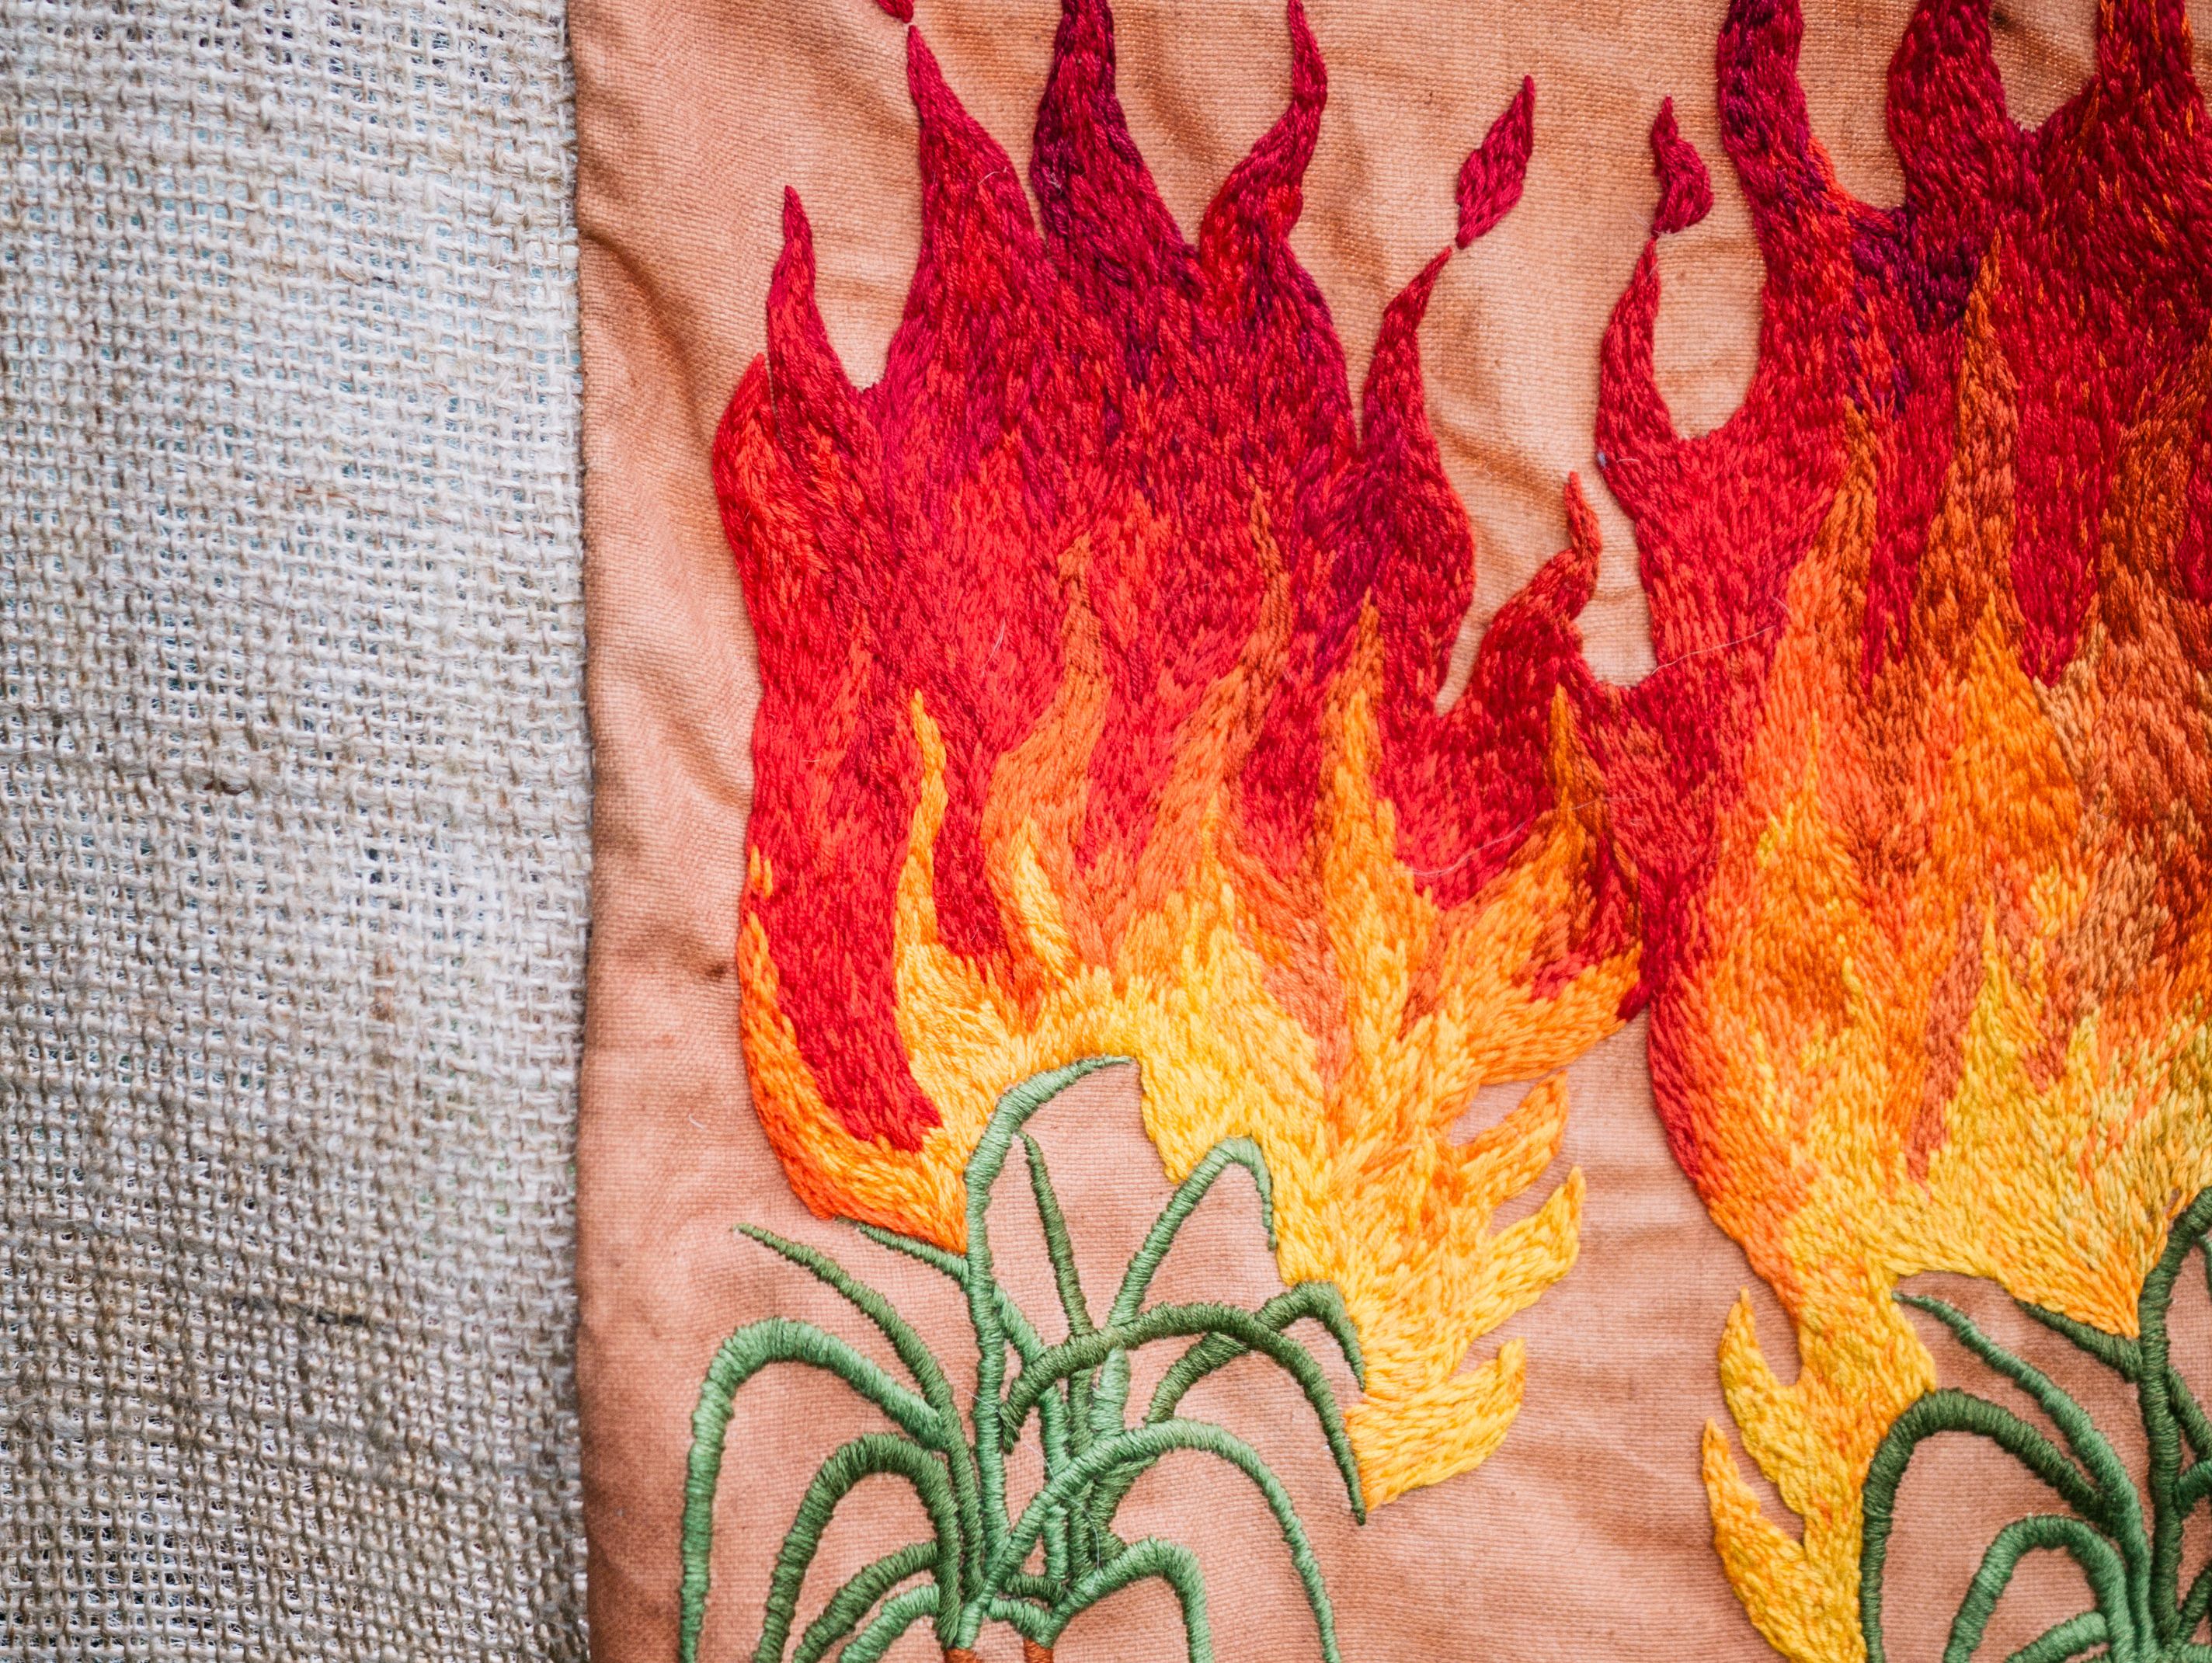 Quishile Charan, Burning Ganna Khet (Burning Sugarcane Farm), 2021, 153cm by 152cm. Technique: hand dyed textile, embroidery thread, cotton, hessian sacks. Textile is naturally dyed with avocado seeds. Image by Matavai Taulangau.